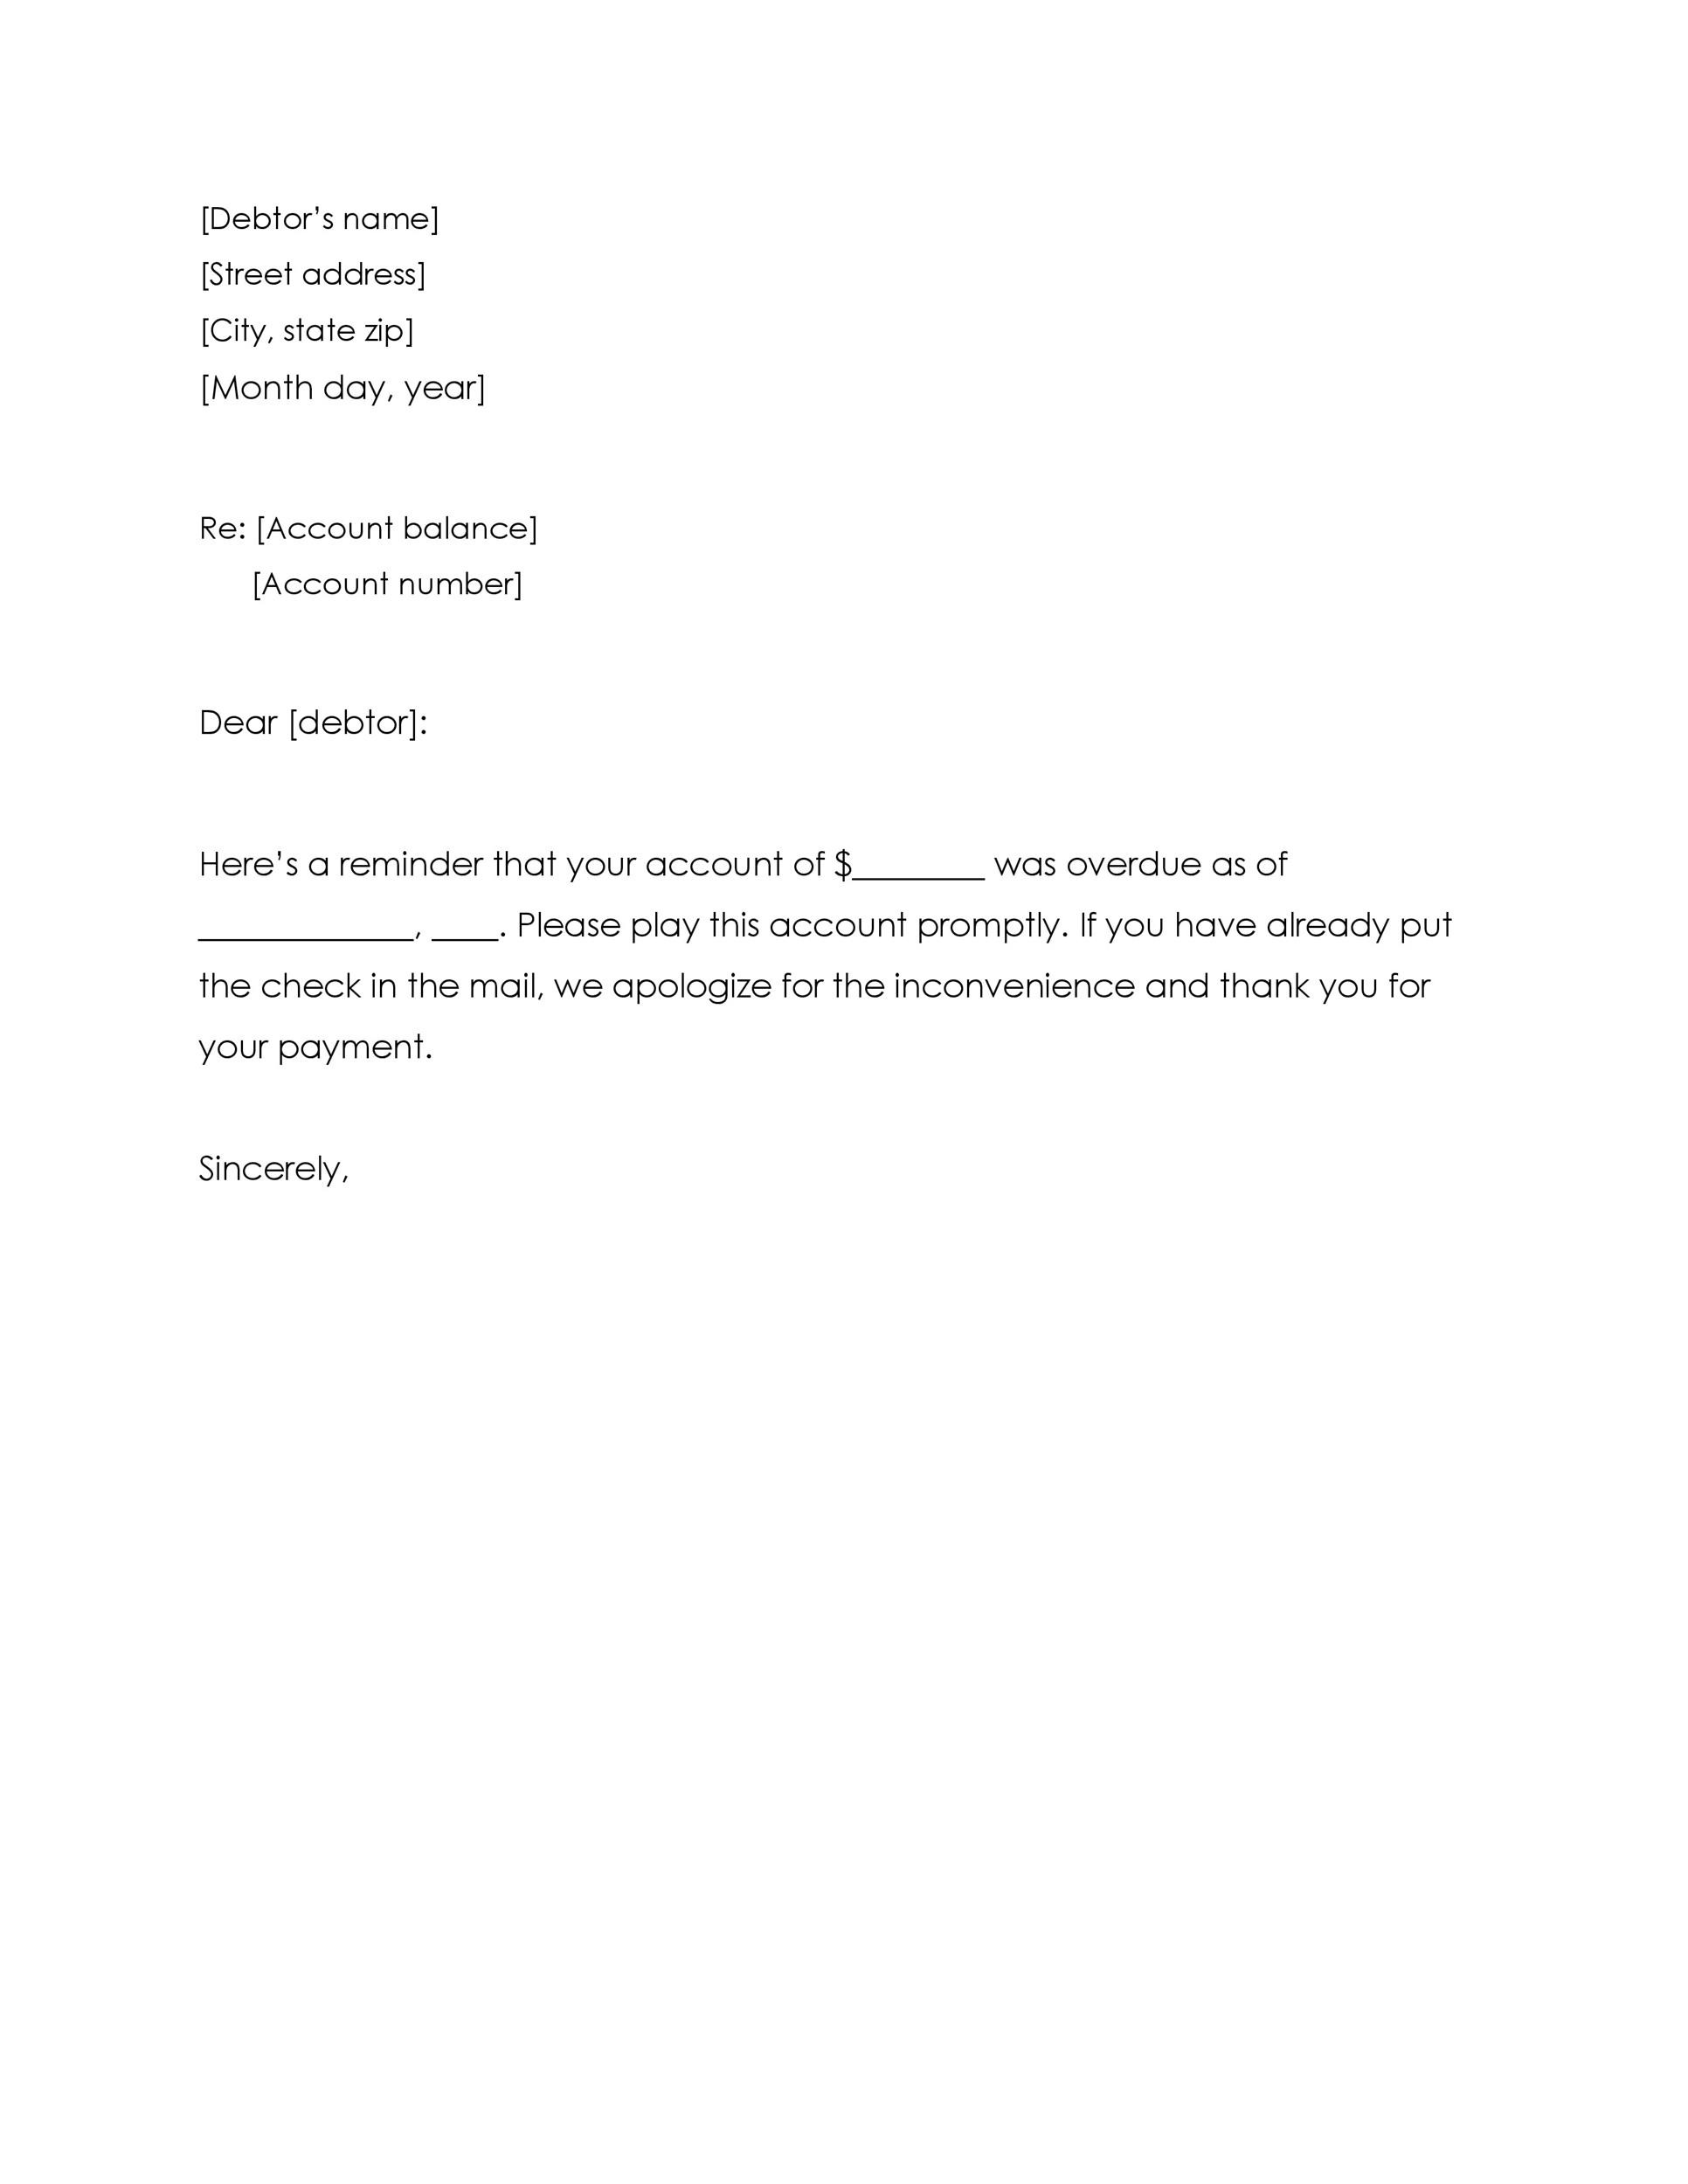 Collection Letter Template